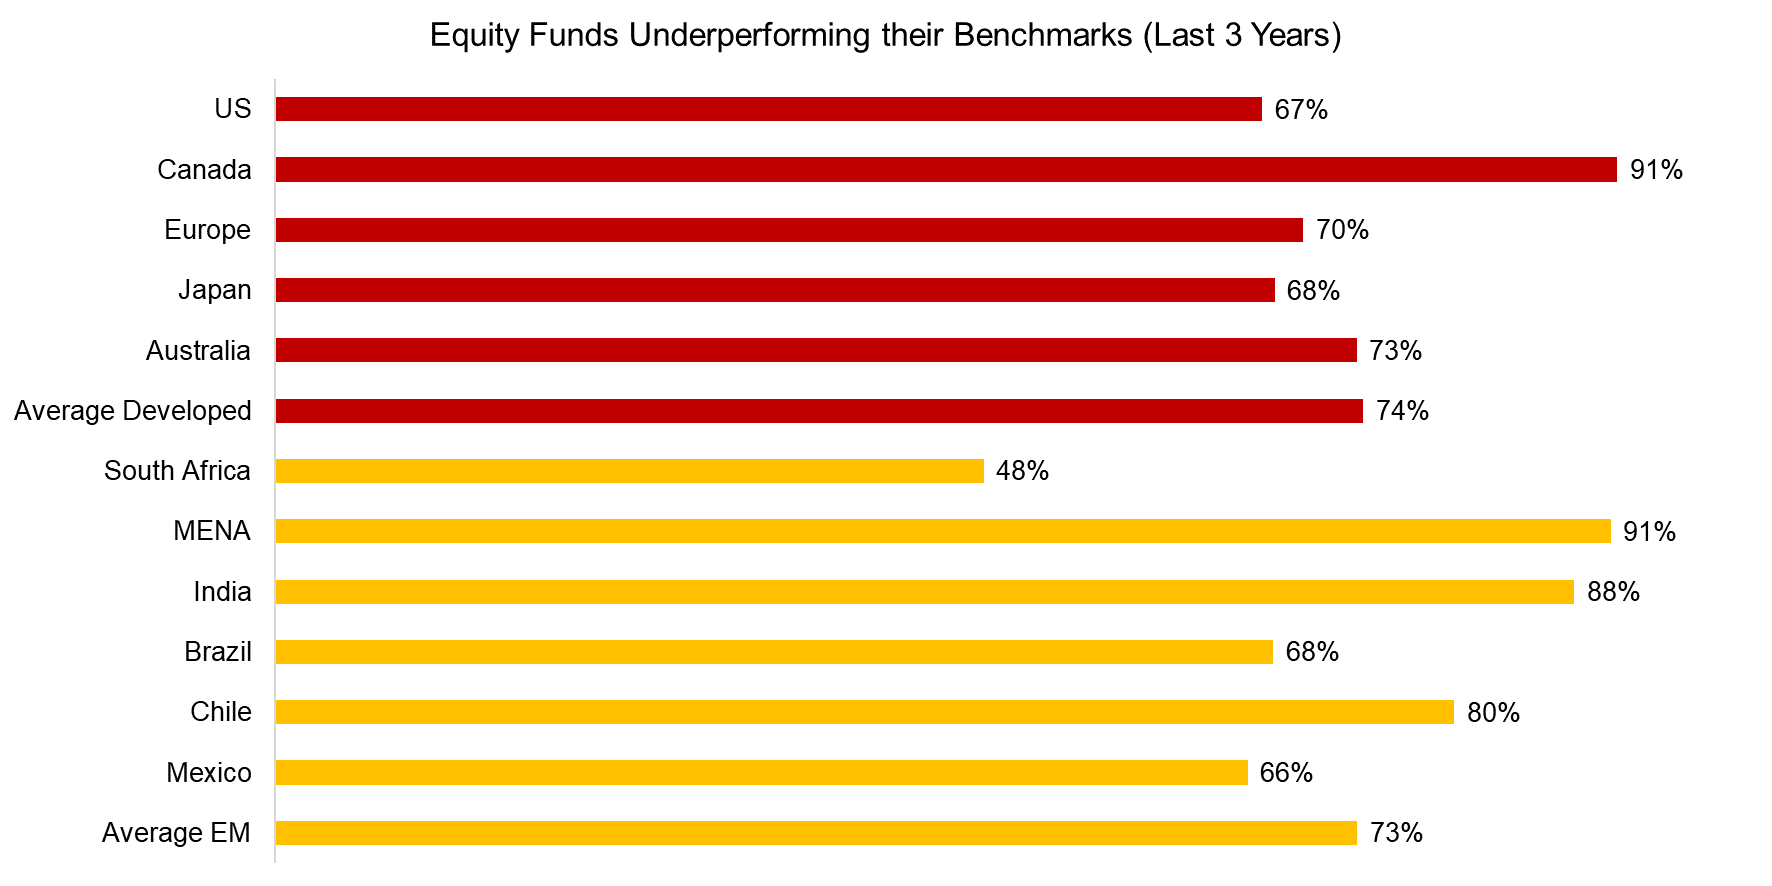 Equity Funds Underperforming their Benchmarks (Last 3 Years)